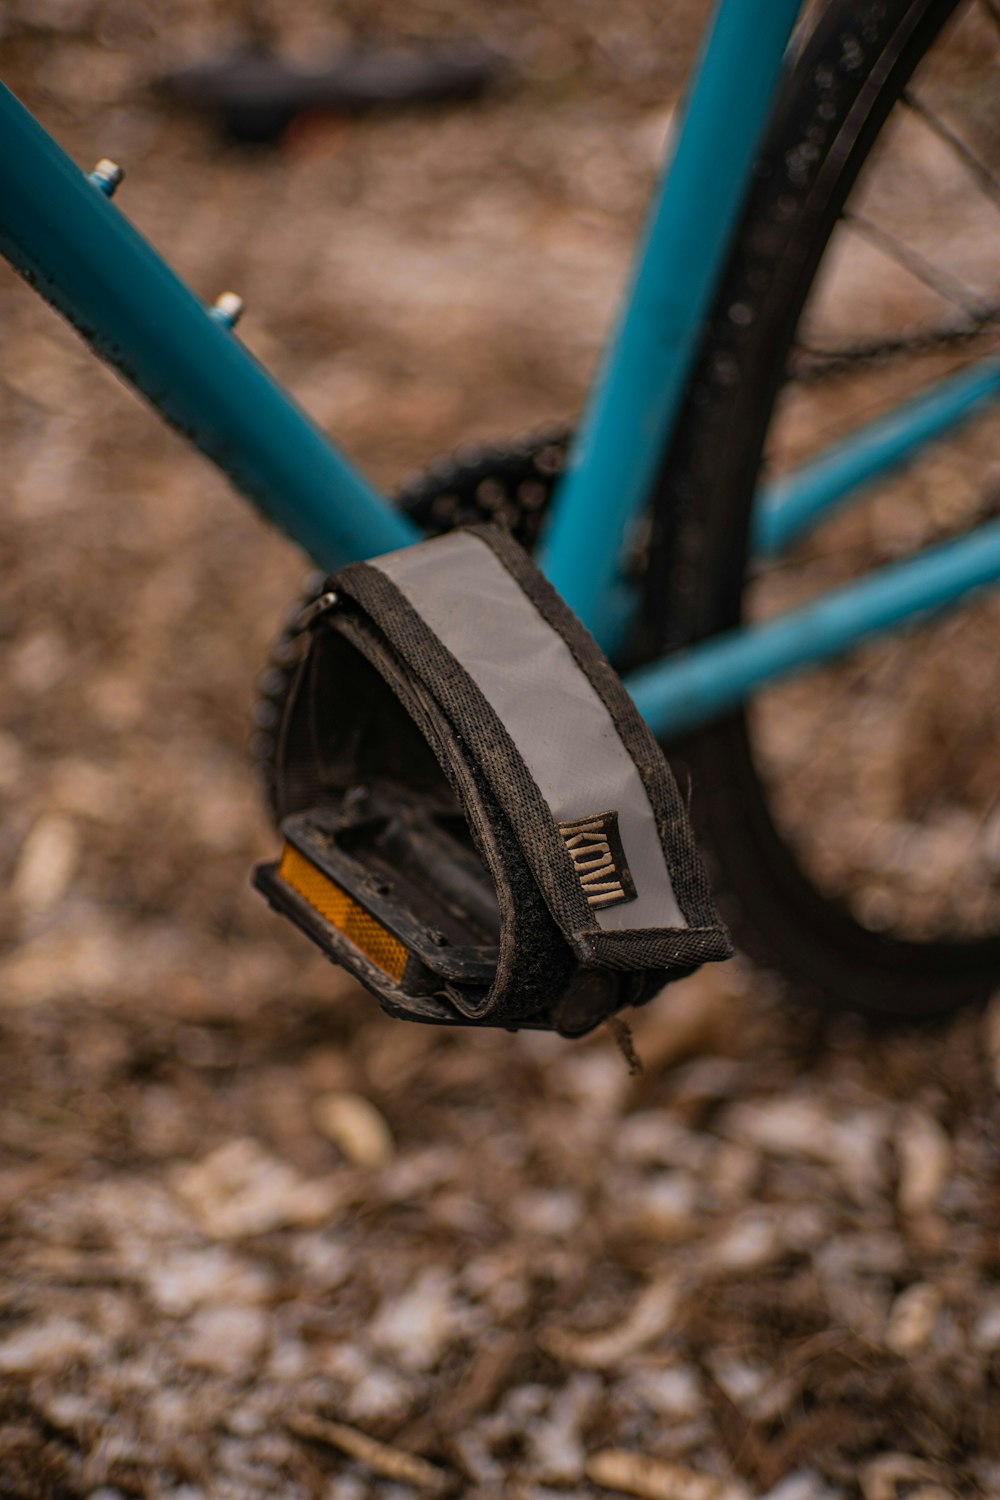 a close up of a bike tire with a bag on it